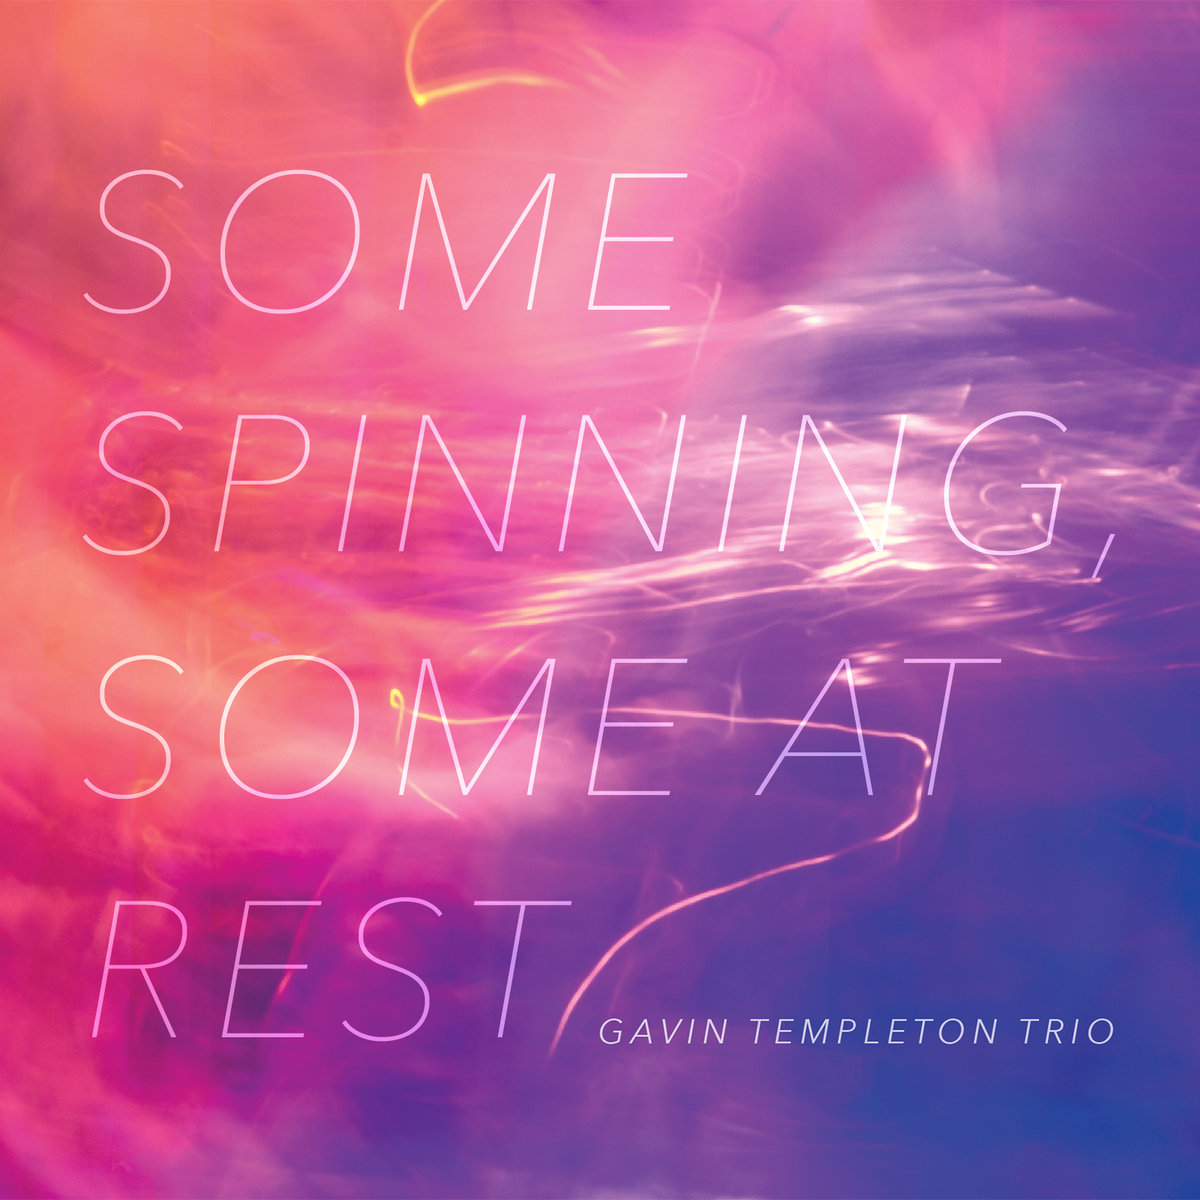 Gavin Templeton Trio | Some Spinning, Some At Rest